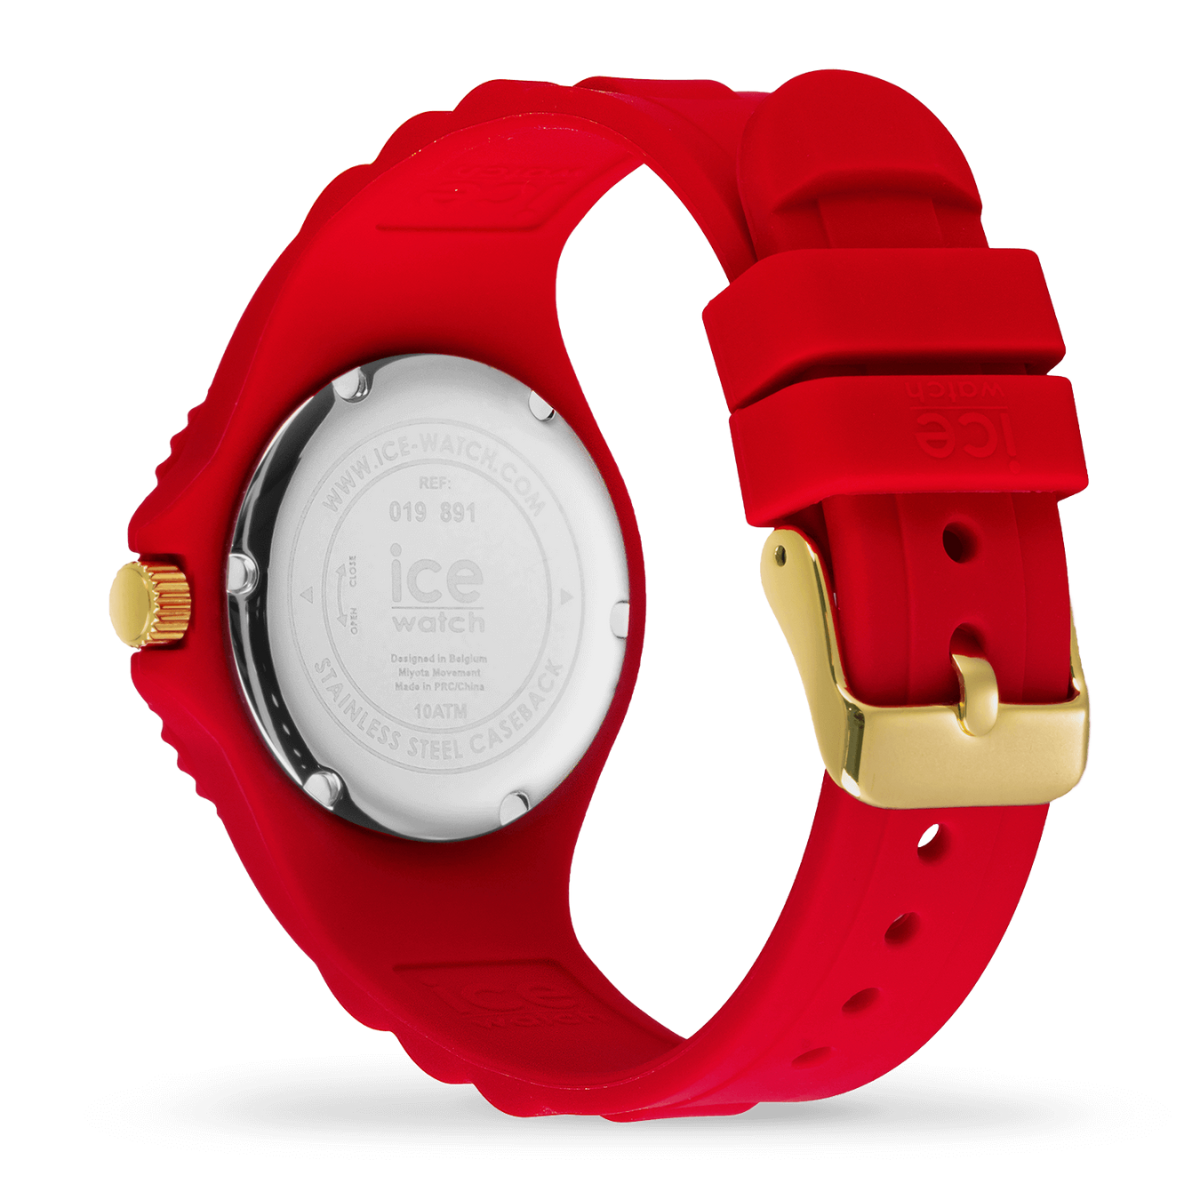 Montre Femme ICE WATCH Rouge 019891